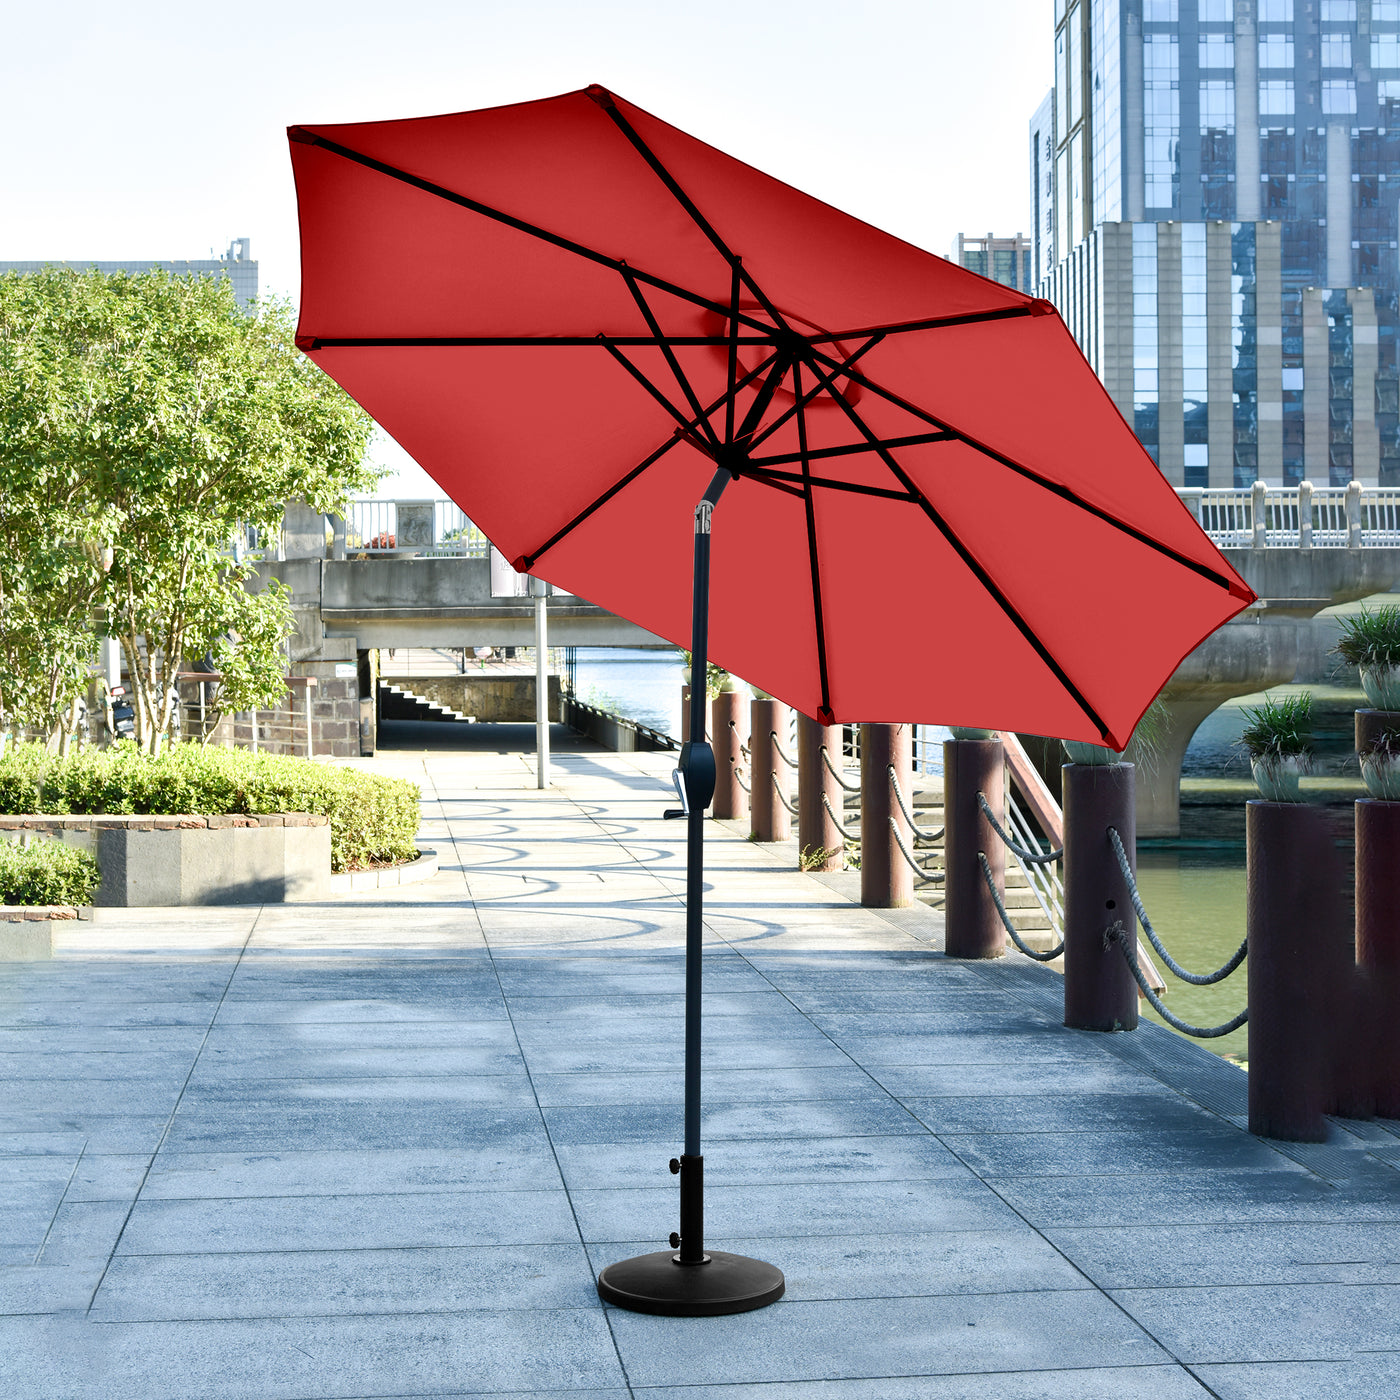 Paolo 9 ft. Patio Umbrella with Weight Base Kit